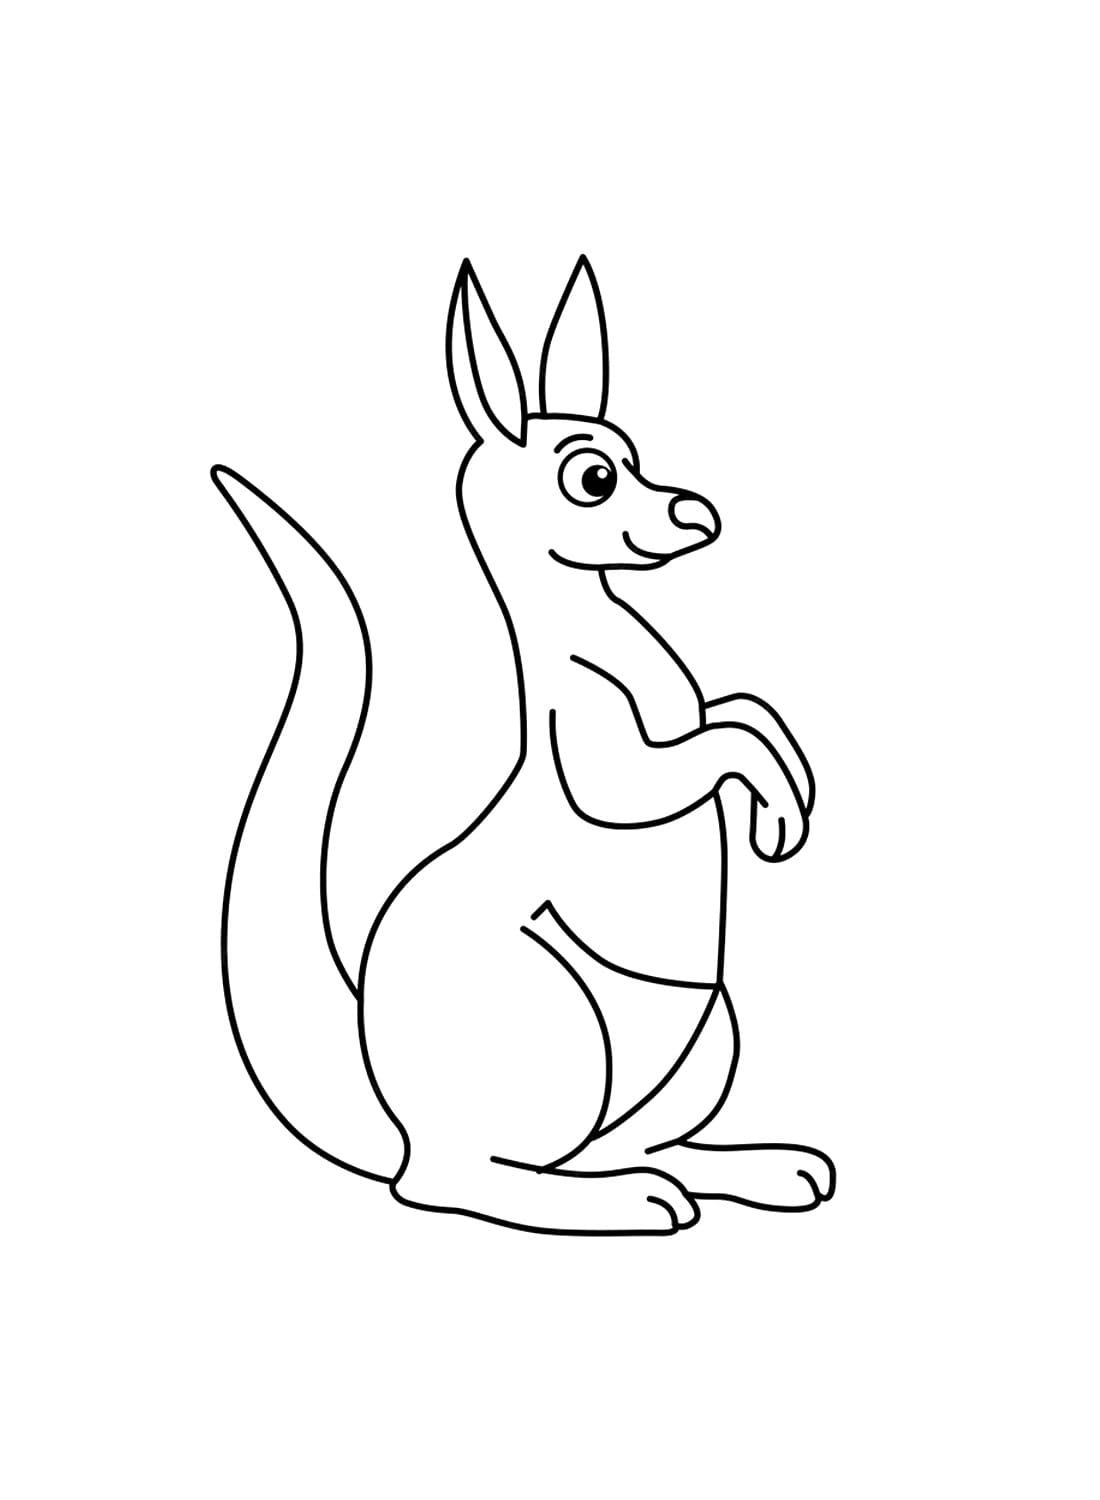 Cartoon Kangaroo coloring page - Download, Print or Color Online for Free